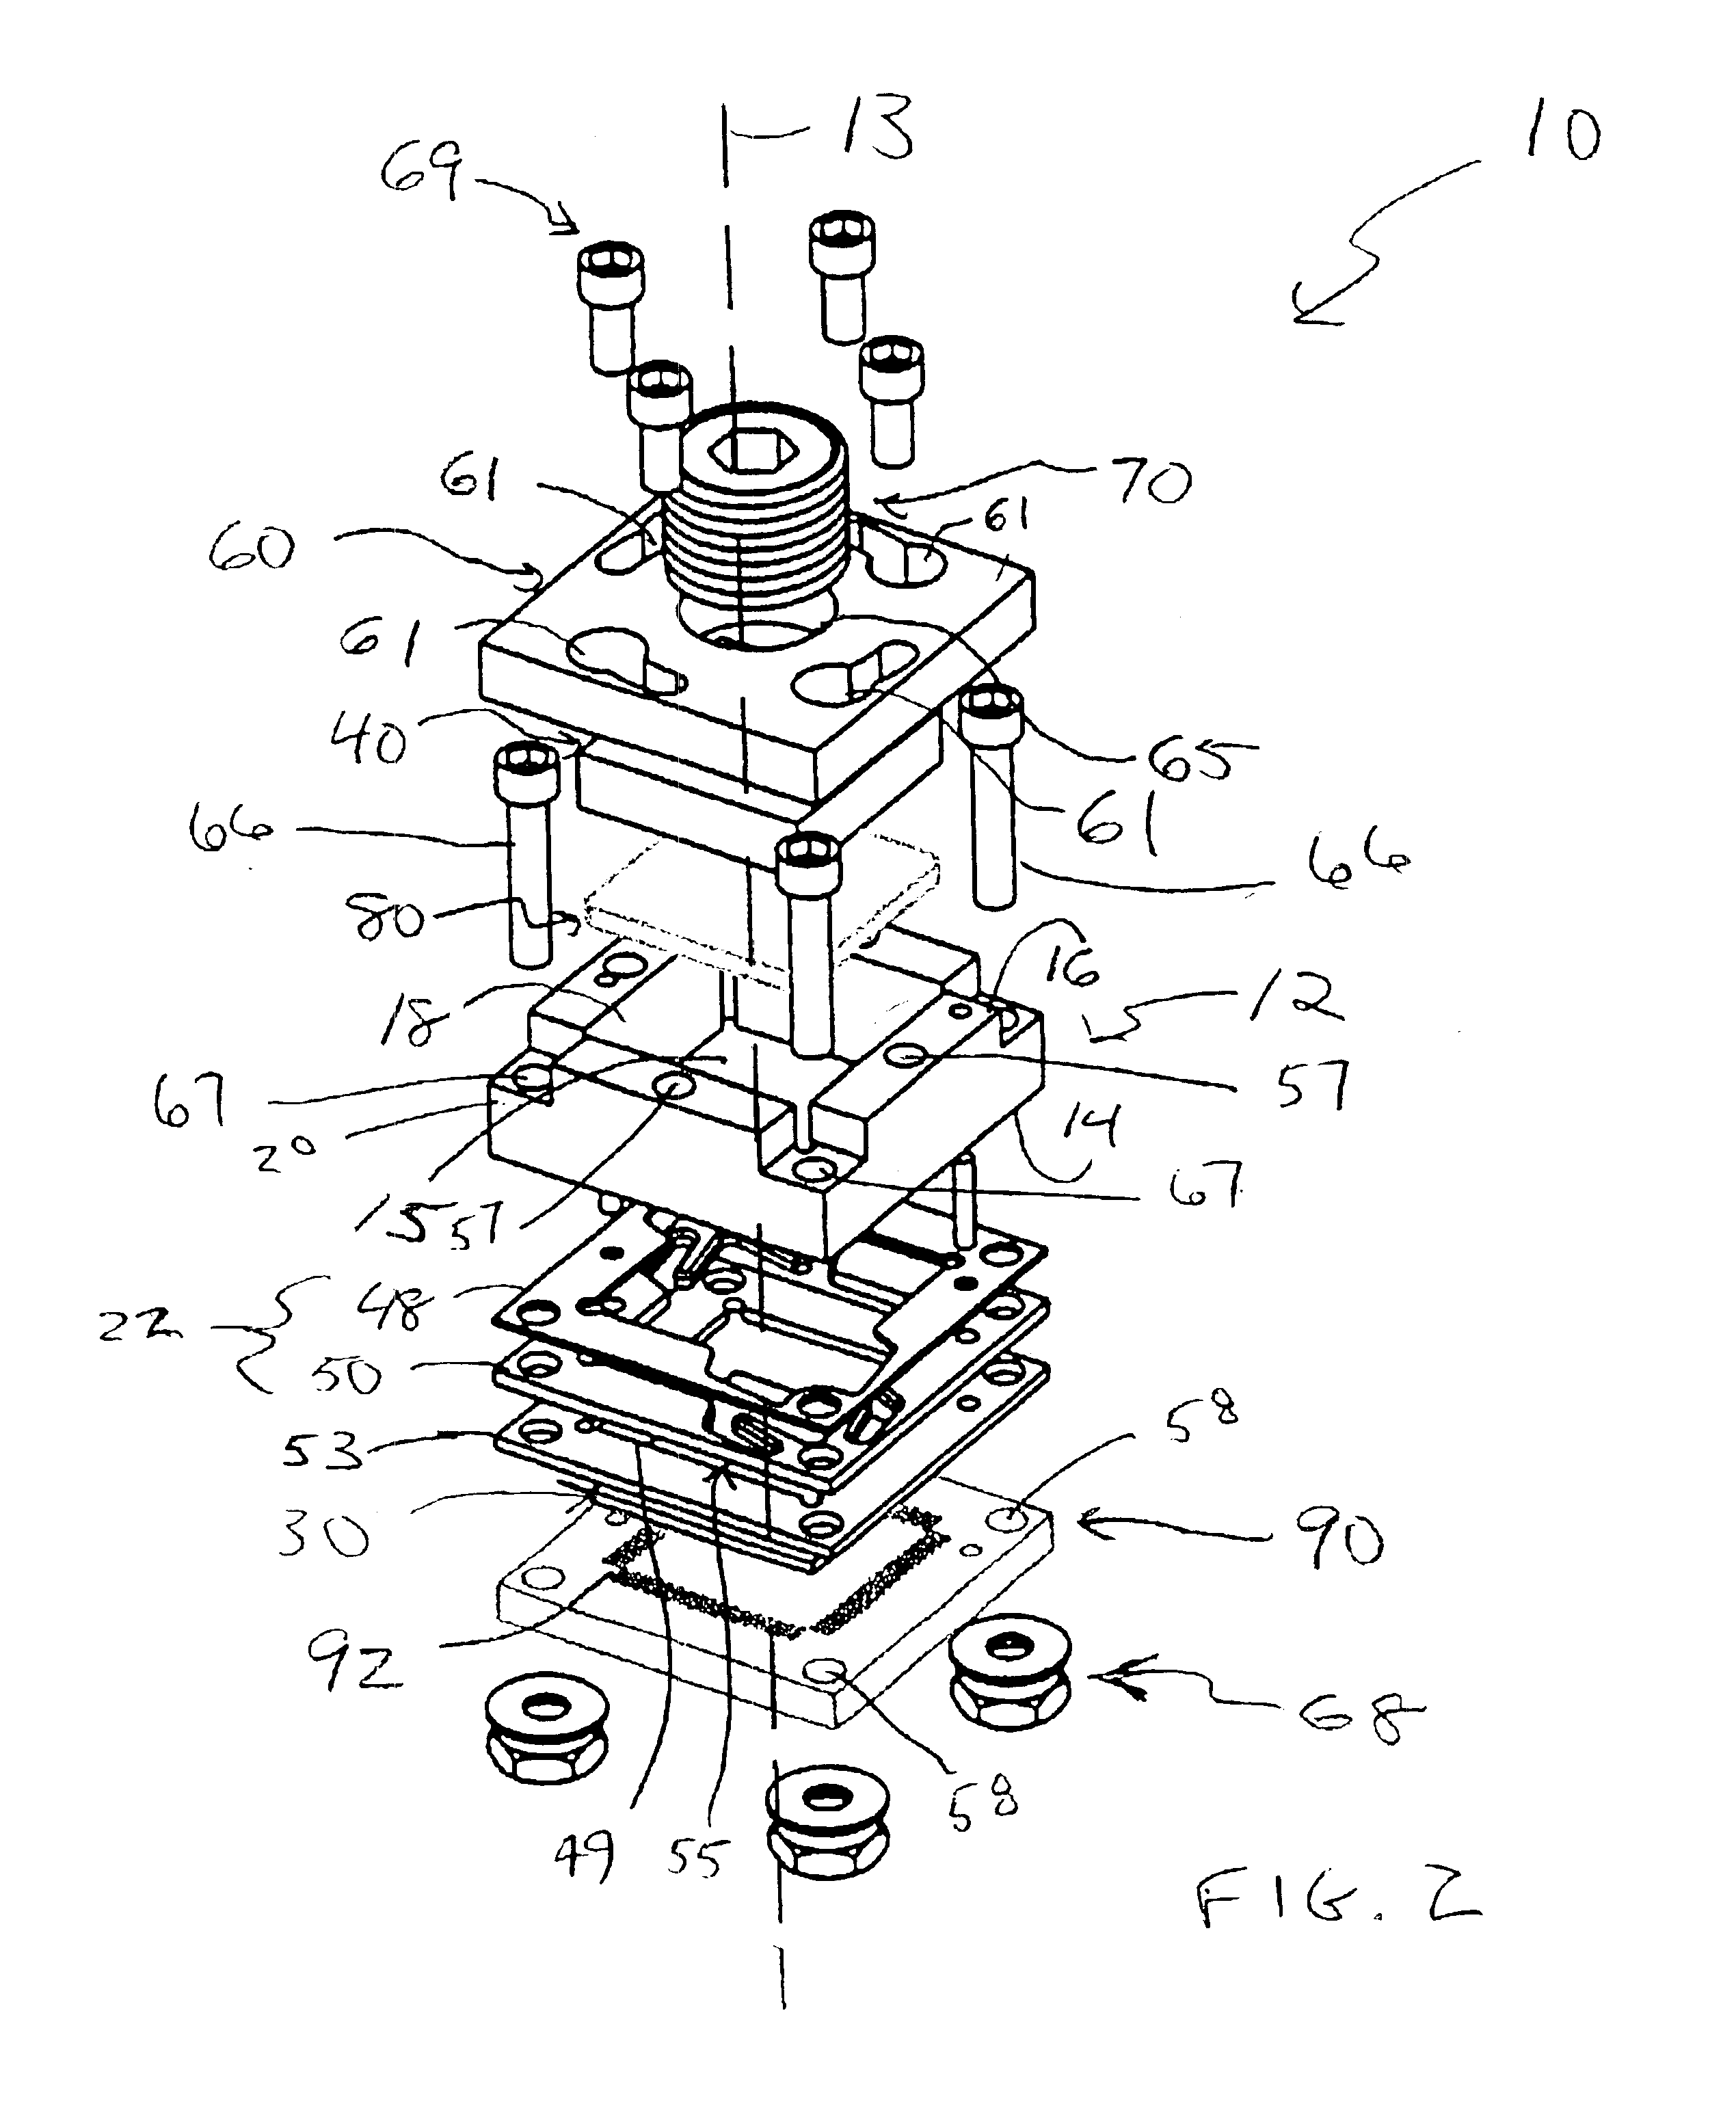 Packaged device adapter assembly with alignment structure and methods regarding same